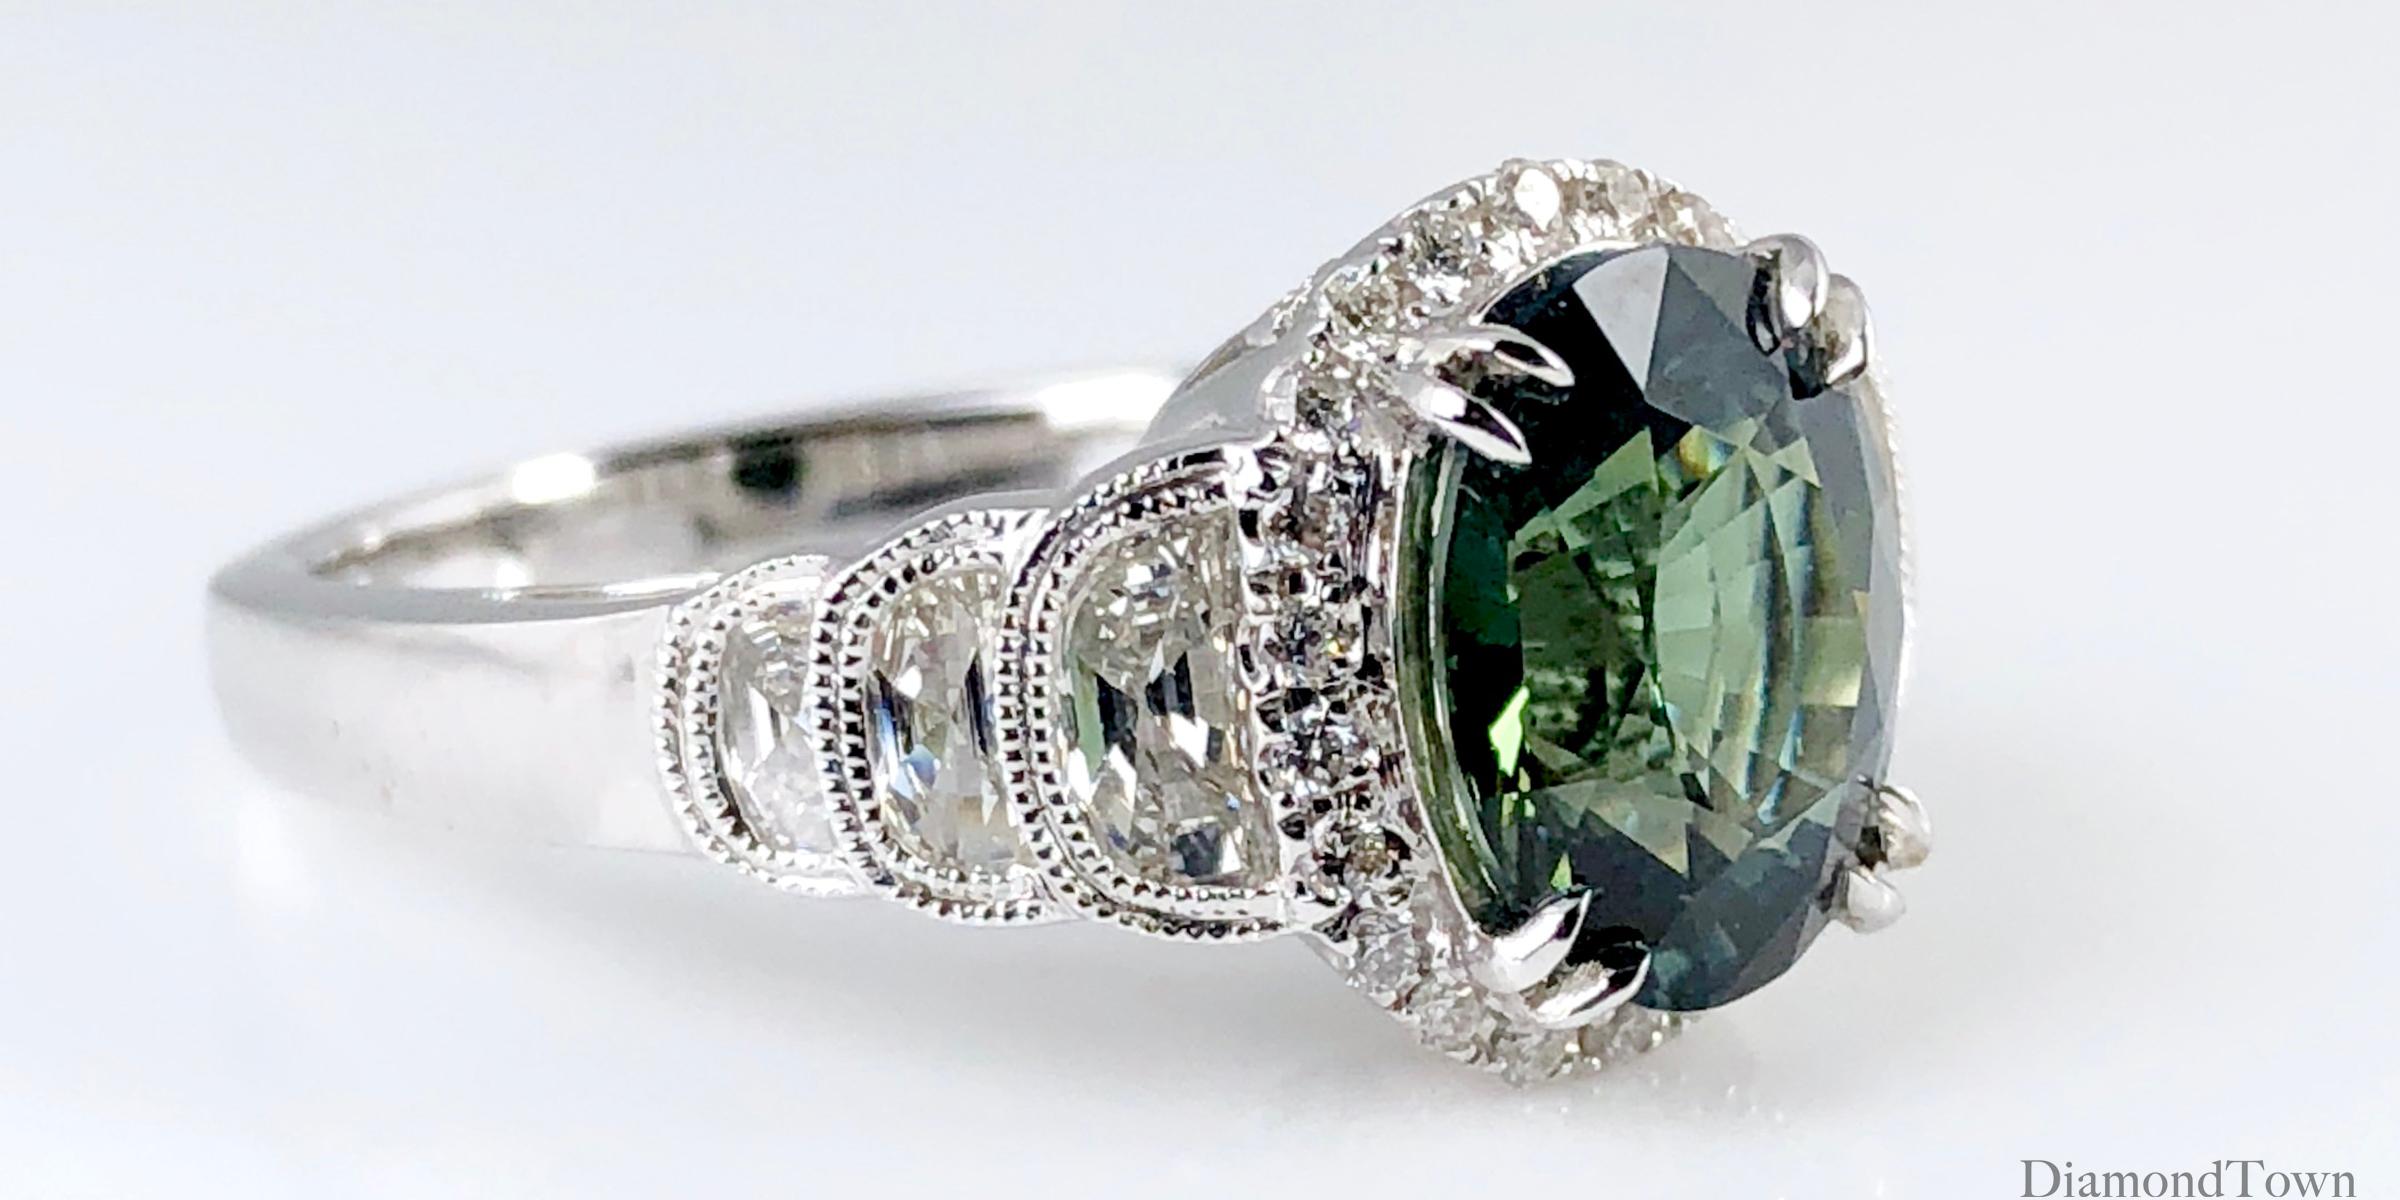 This gorgeous GIA Certified ring features a 2.86 carat oval cut Forest Green Sapphire center, surrounded by a halo of round white diamonds. Each side shank features 3 half moon diamonds of descending size, decorated with detailed milgrain work.

GIA